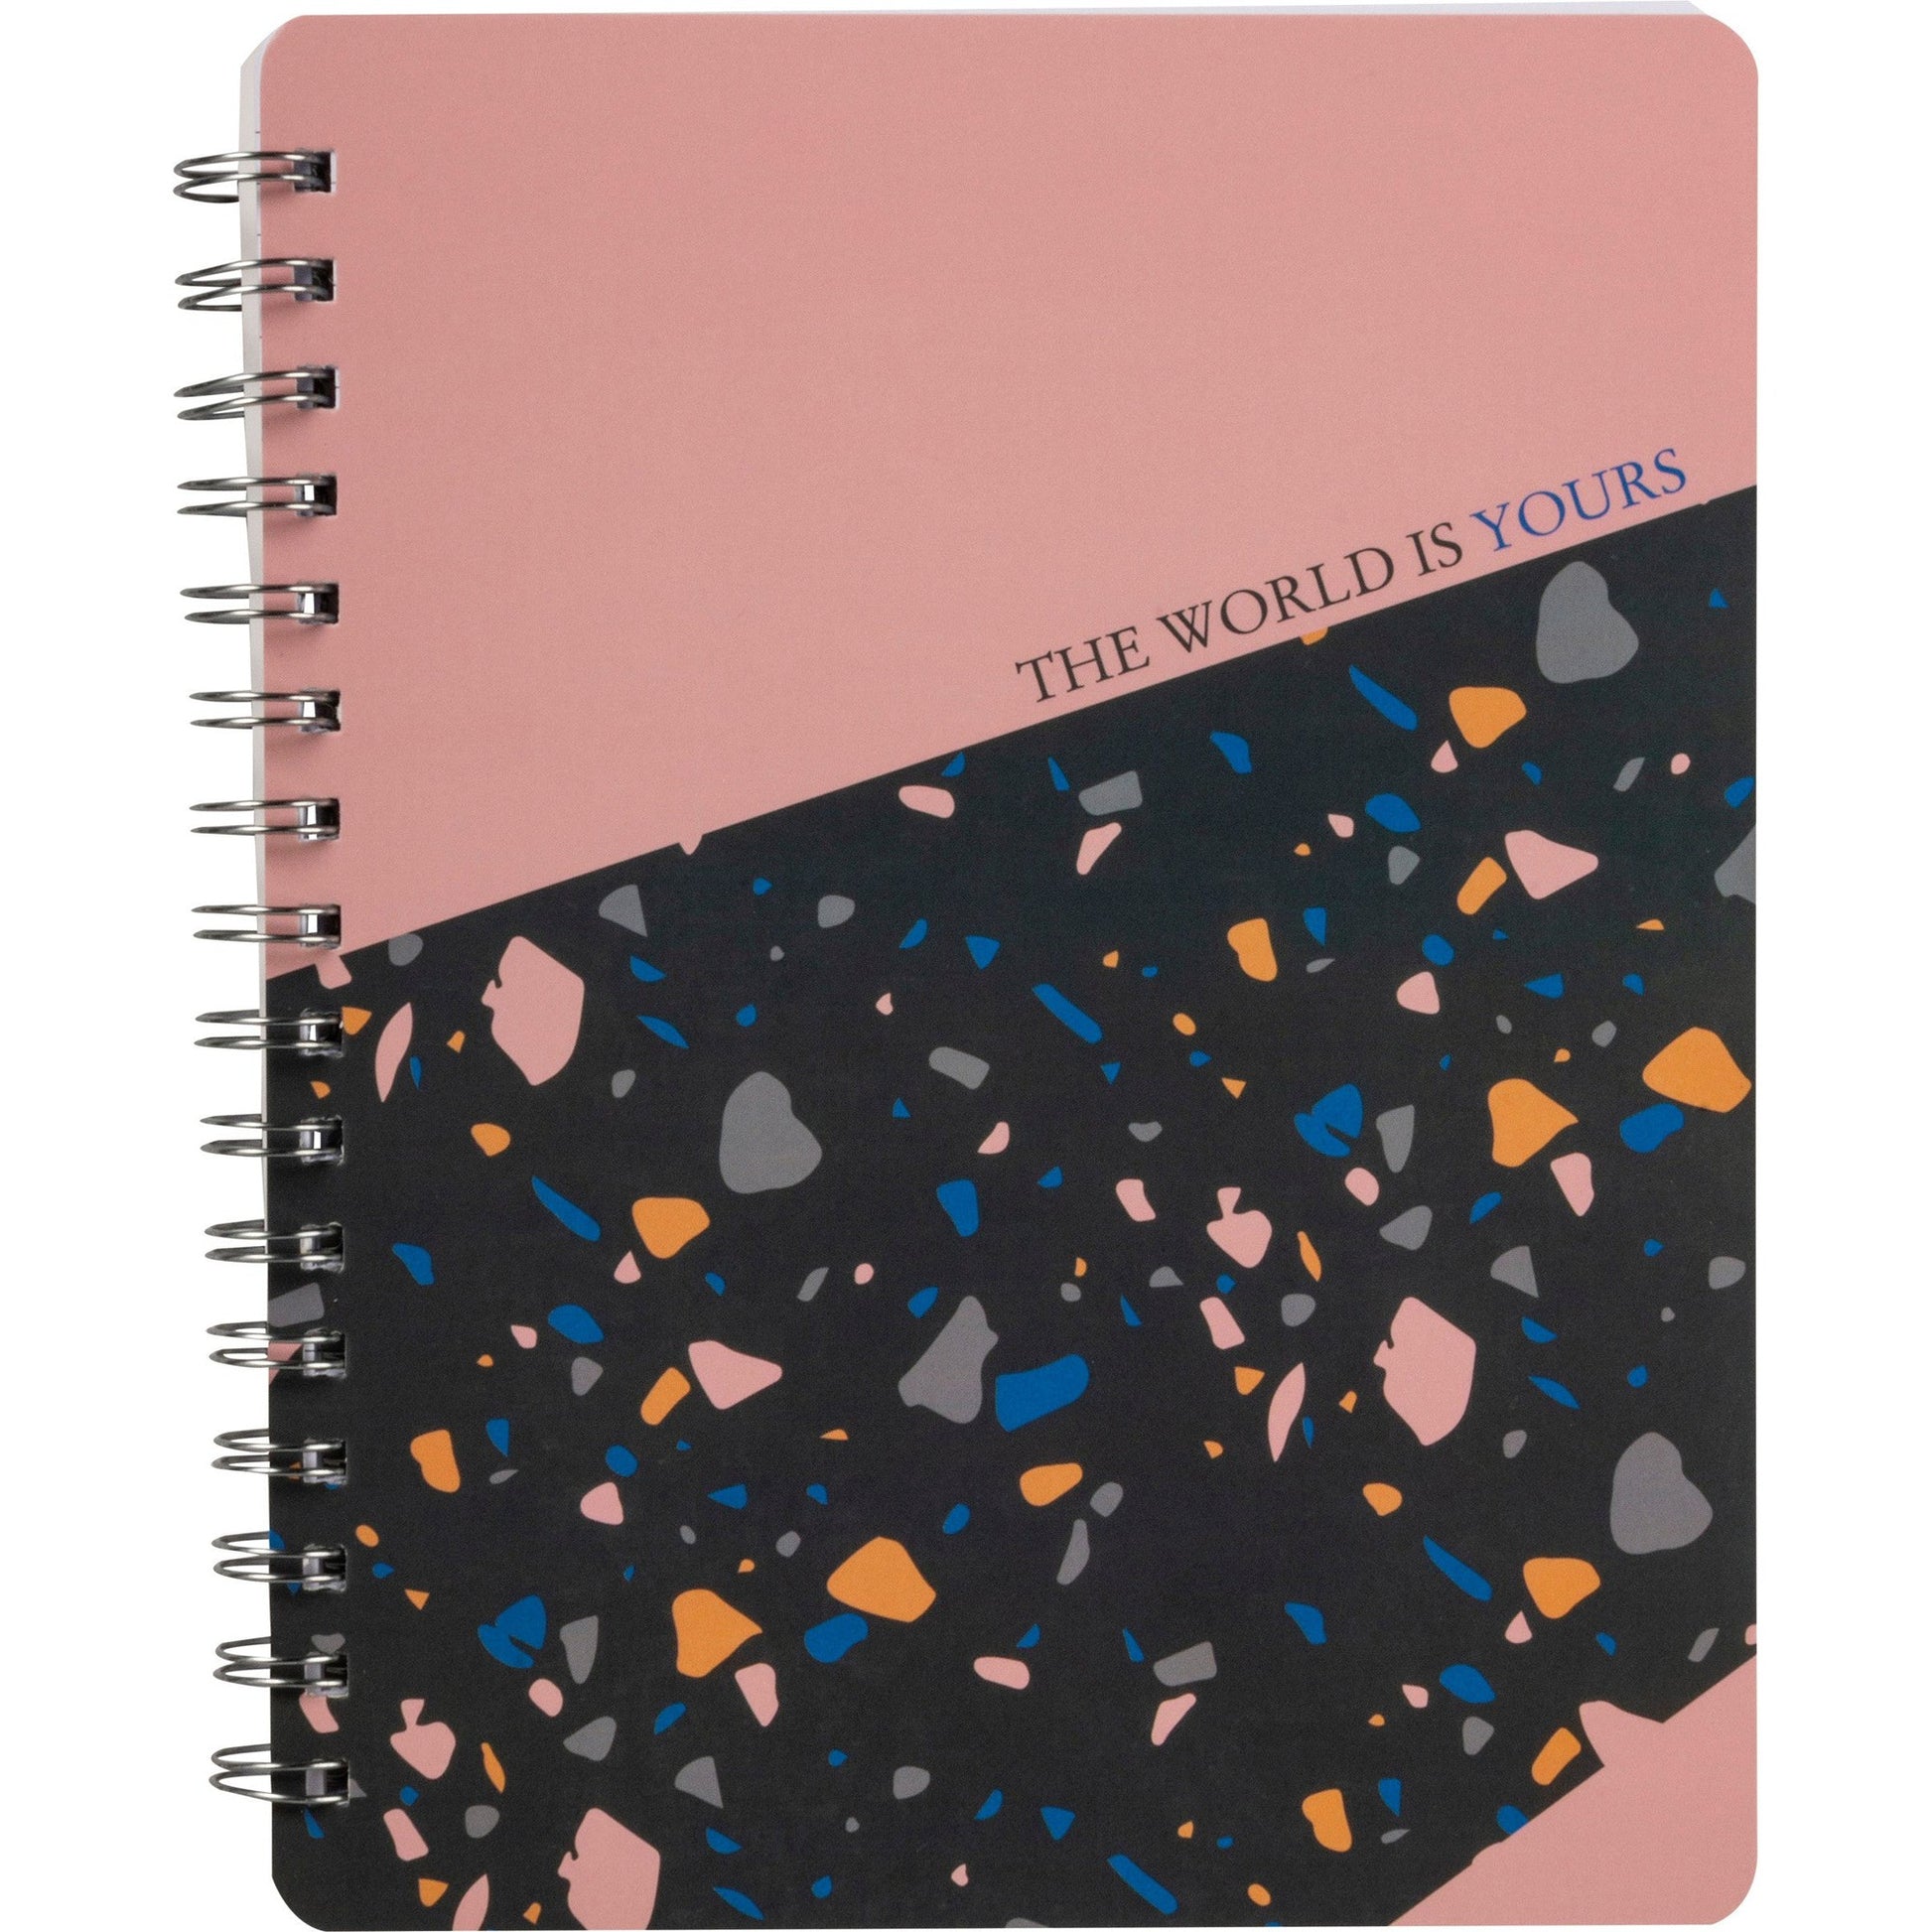 The World Is Yours Spiral Notebook in Colorful Terrazzo Design | Art on Both Sides | 9" x 7" | 120 Lined Pages | 1980s Memphis-Inspired Design